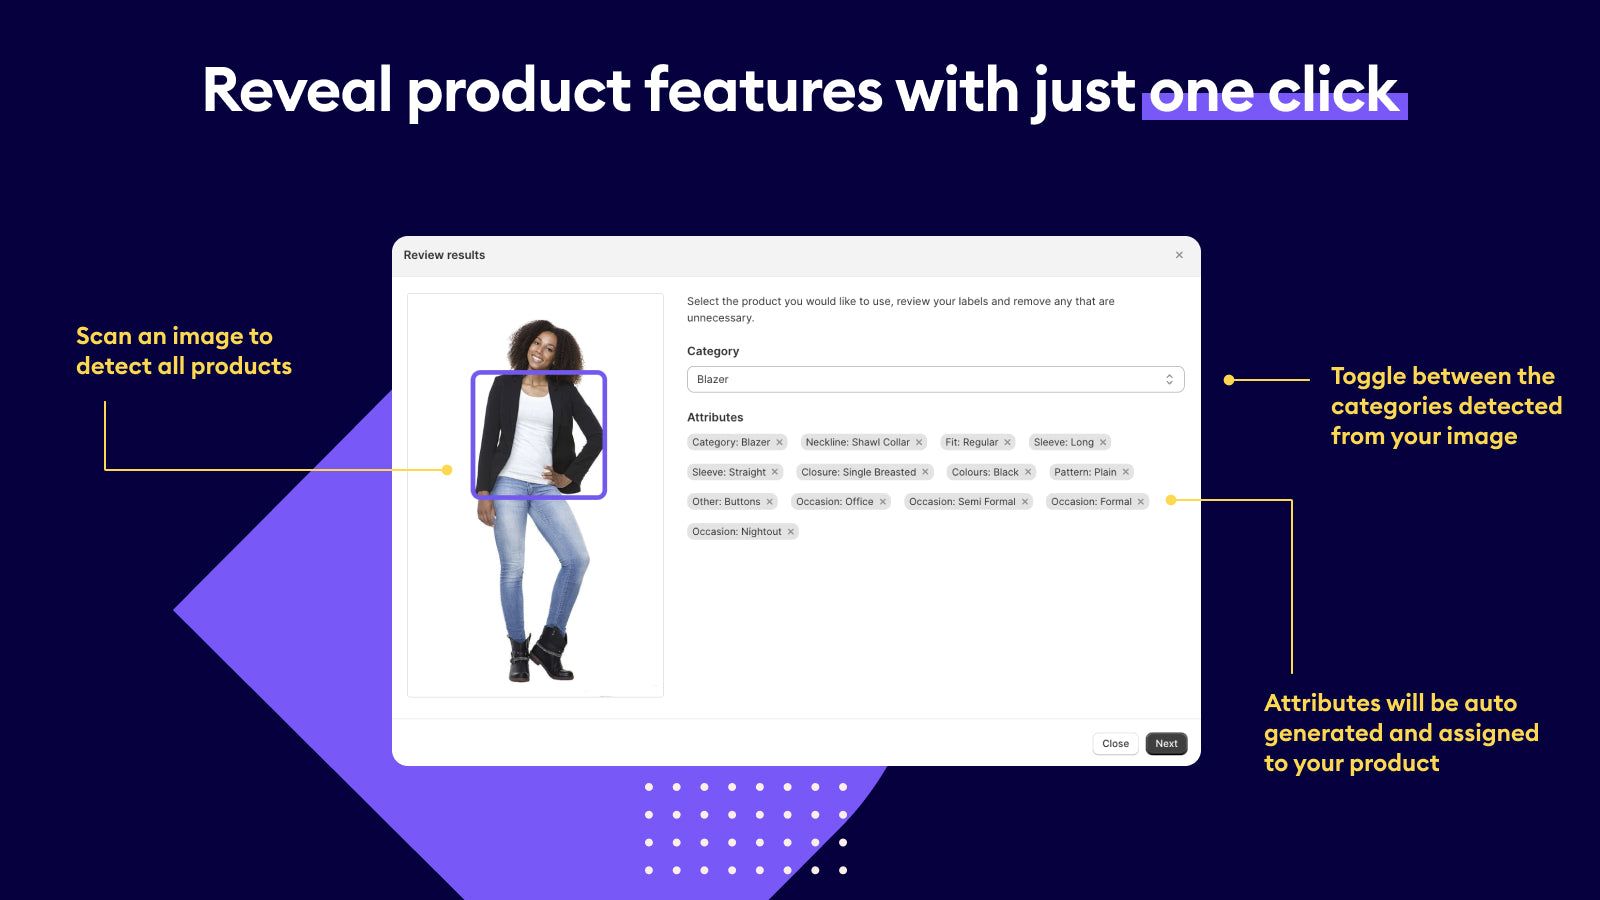 Reveal product features with just one click